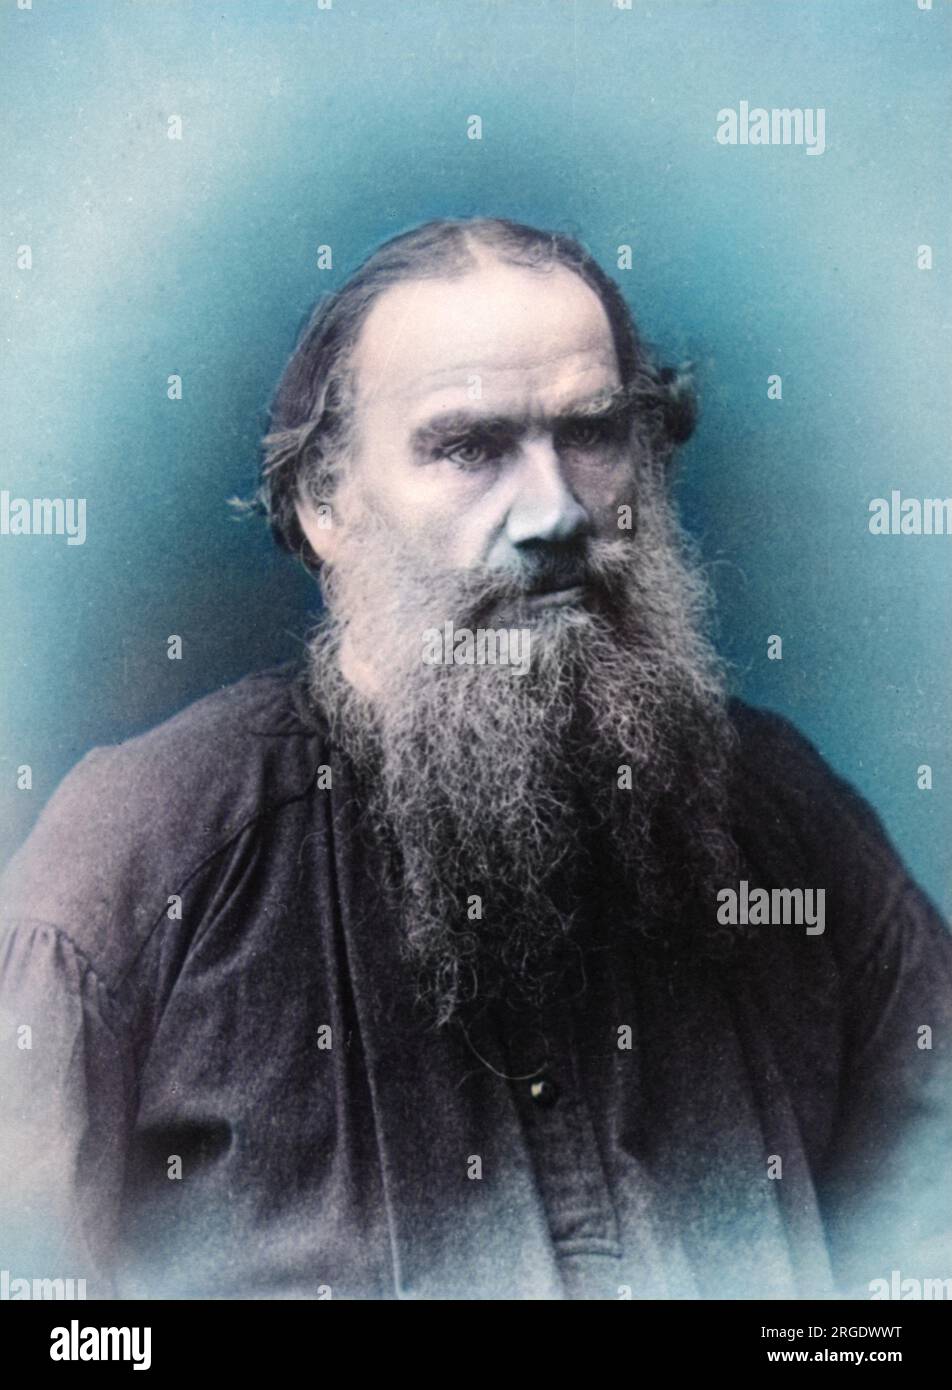 Portrait photograph of Leo Tolstoy.  Russian writer famous for the novels War and Peace and Anna Karenina. Stock Photo